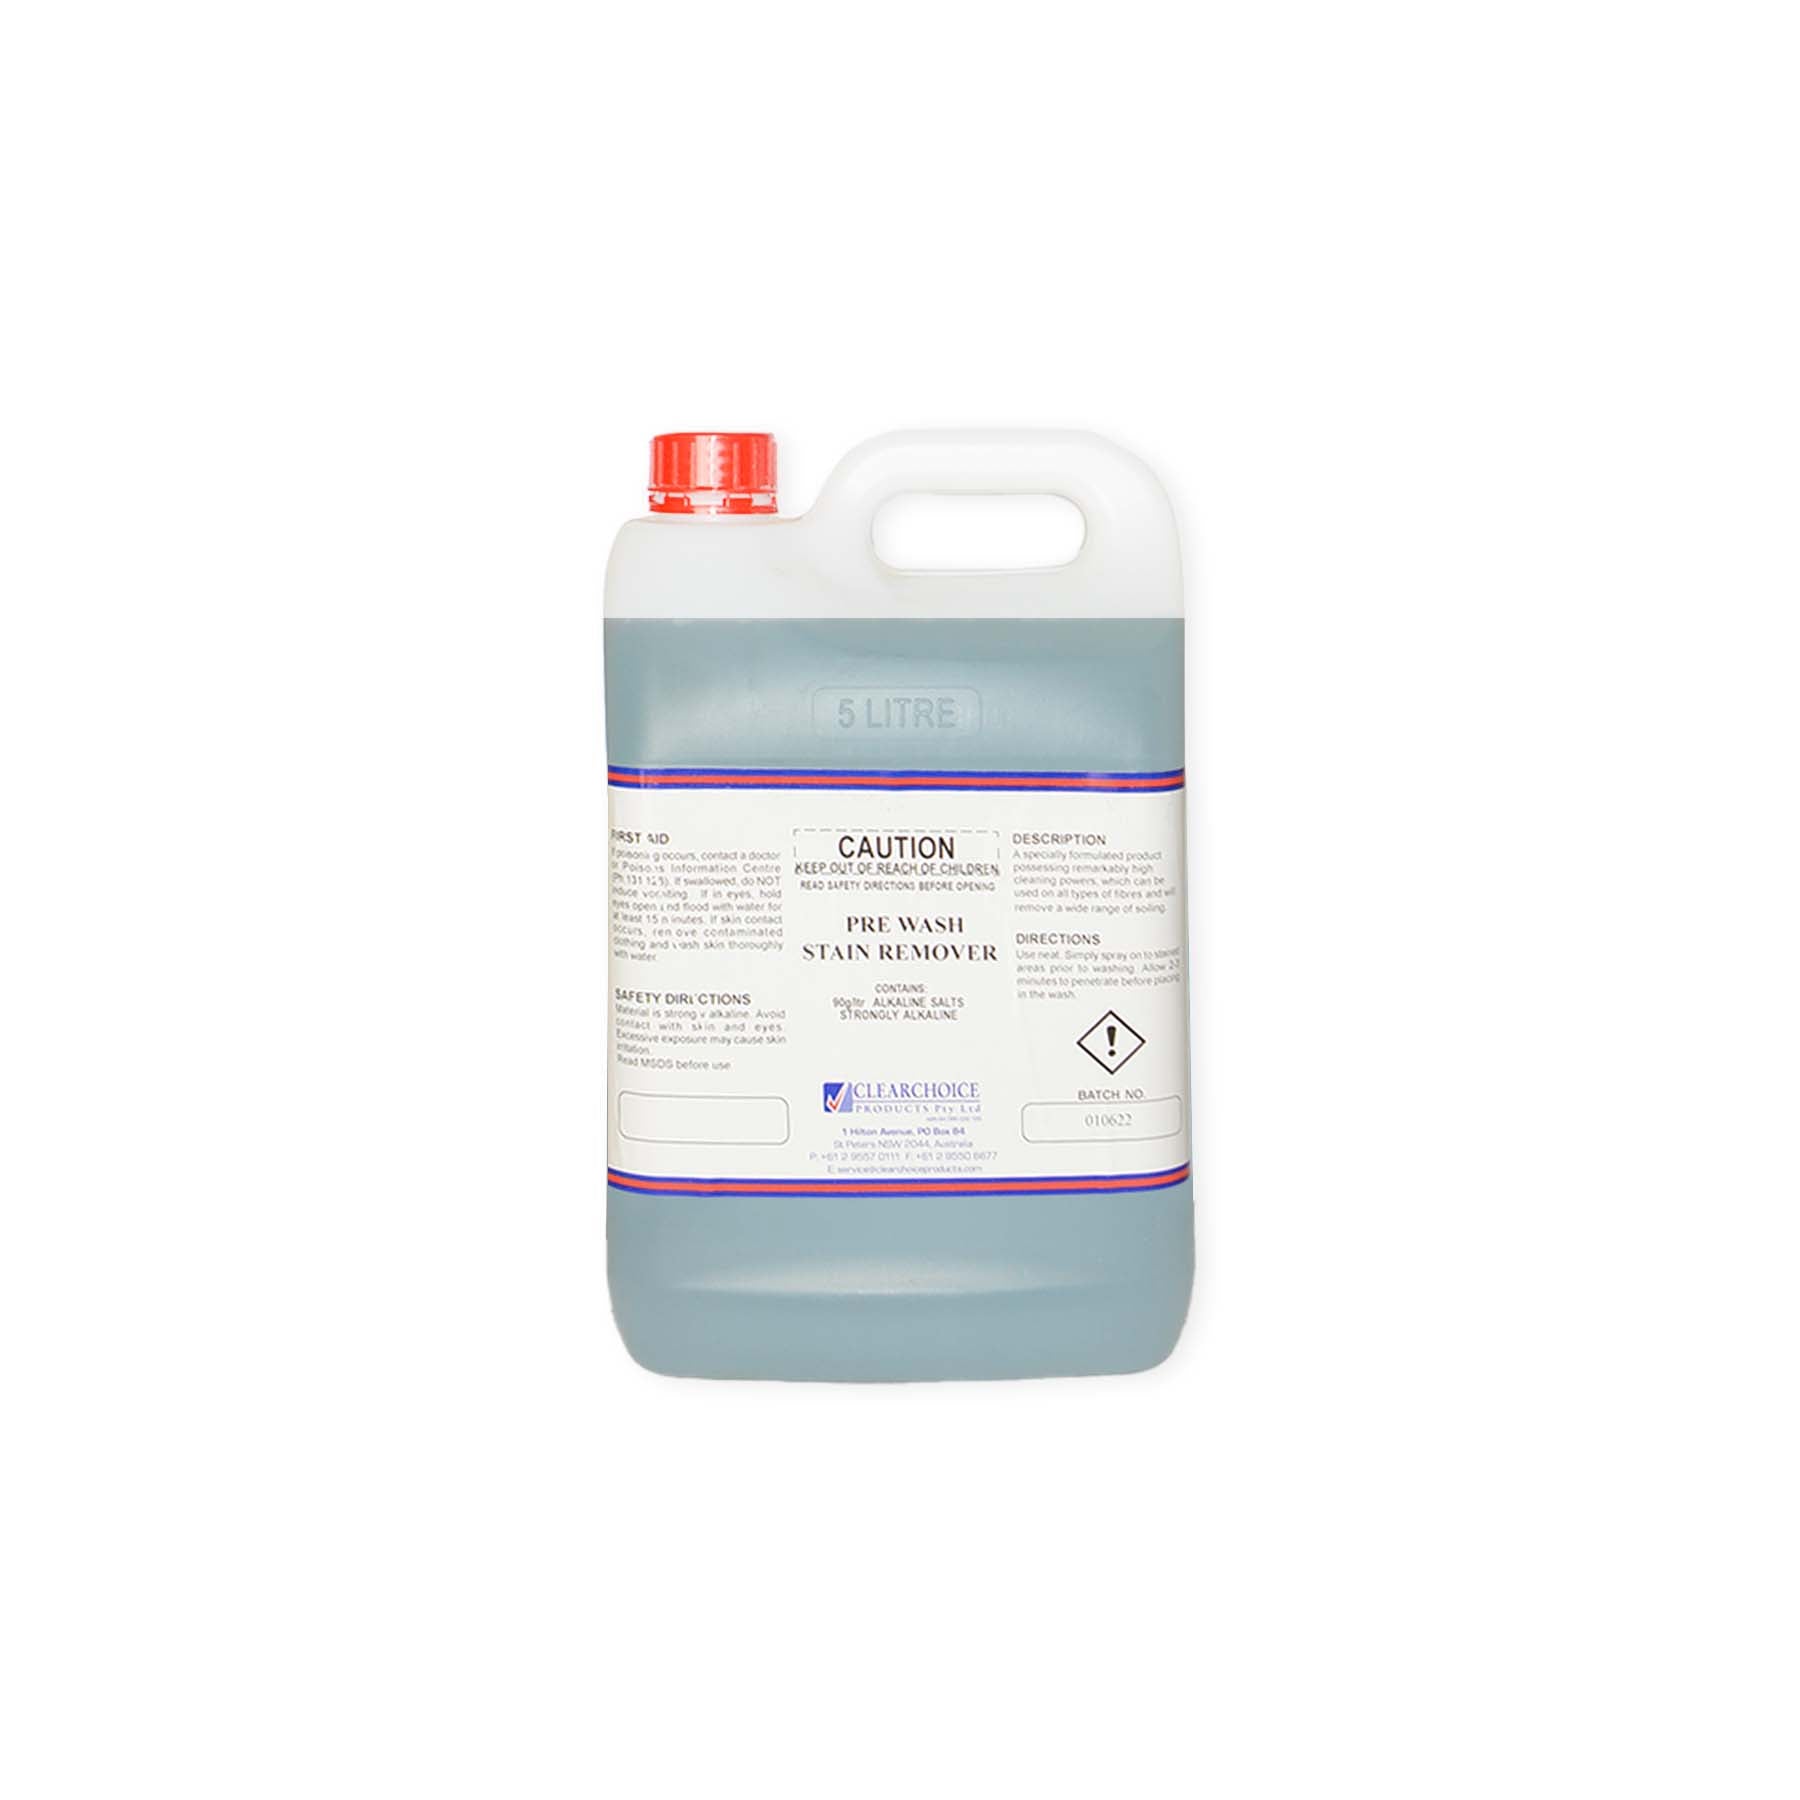 CLEARCHOICE PRE-WASH STAIN REMOVER 5L